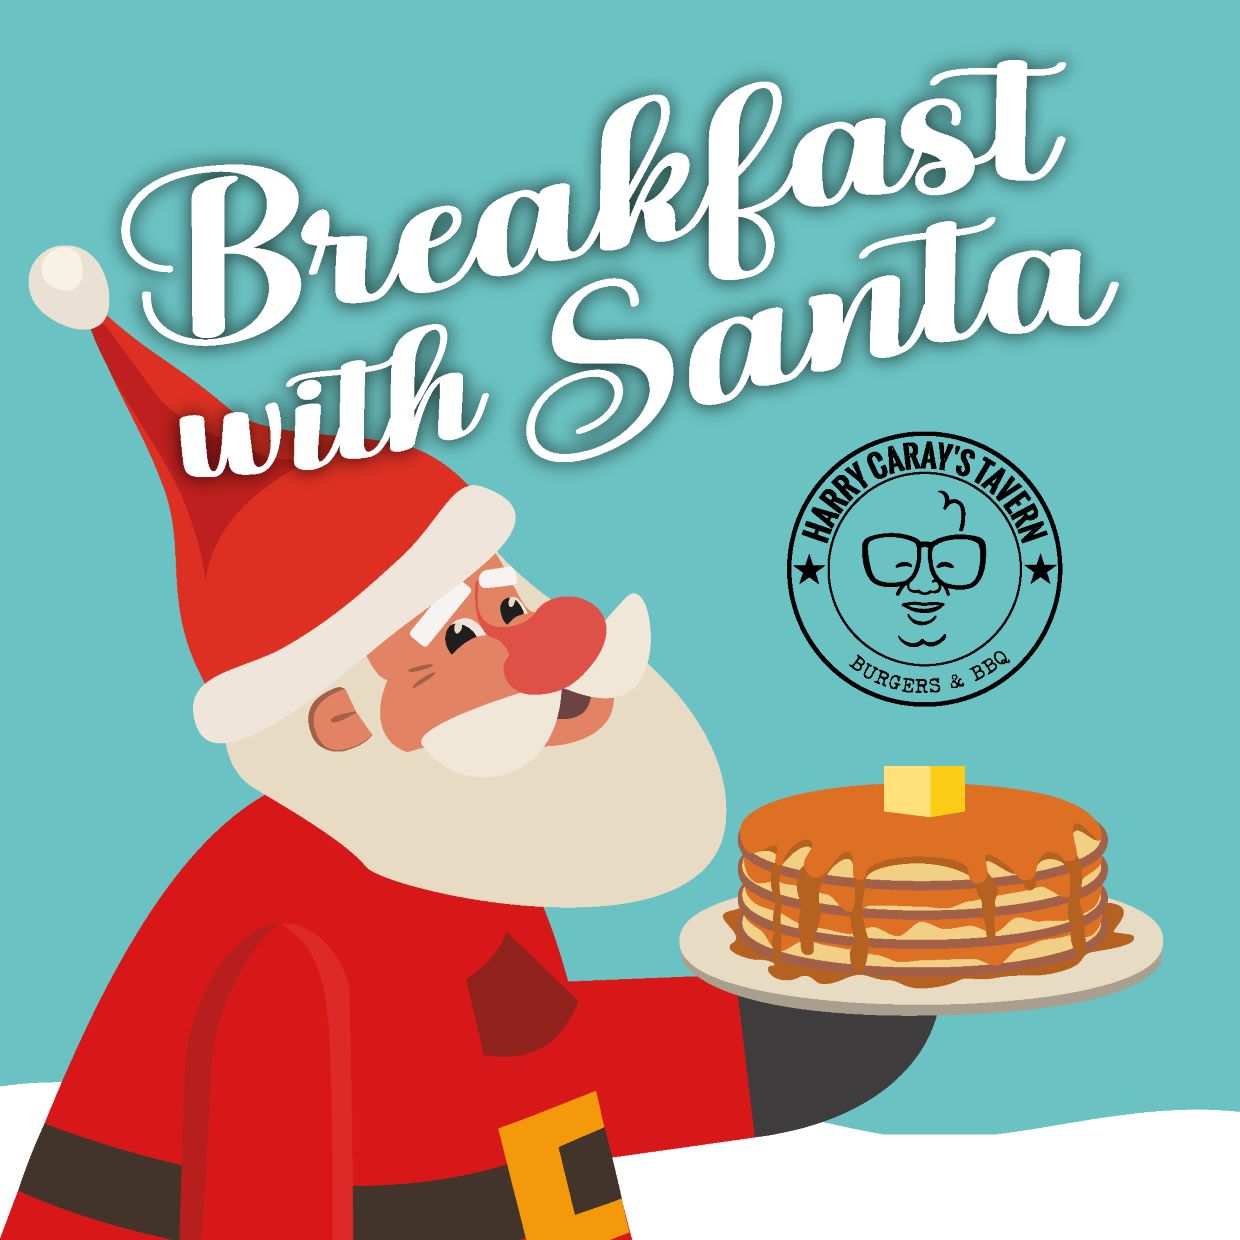 Santa With Pancakes Graphic for Breakfast With Santa at Harry Caray's Tavern at Navy Pier